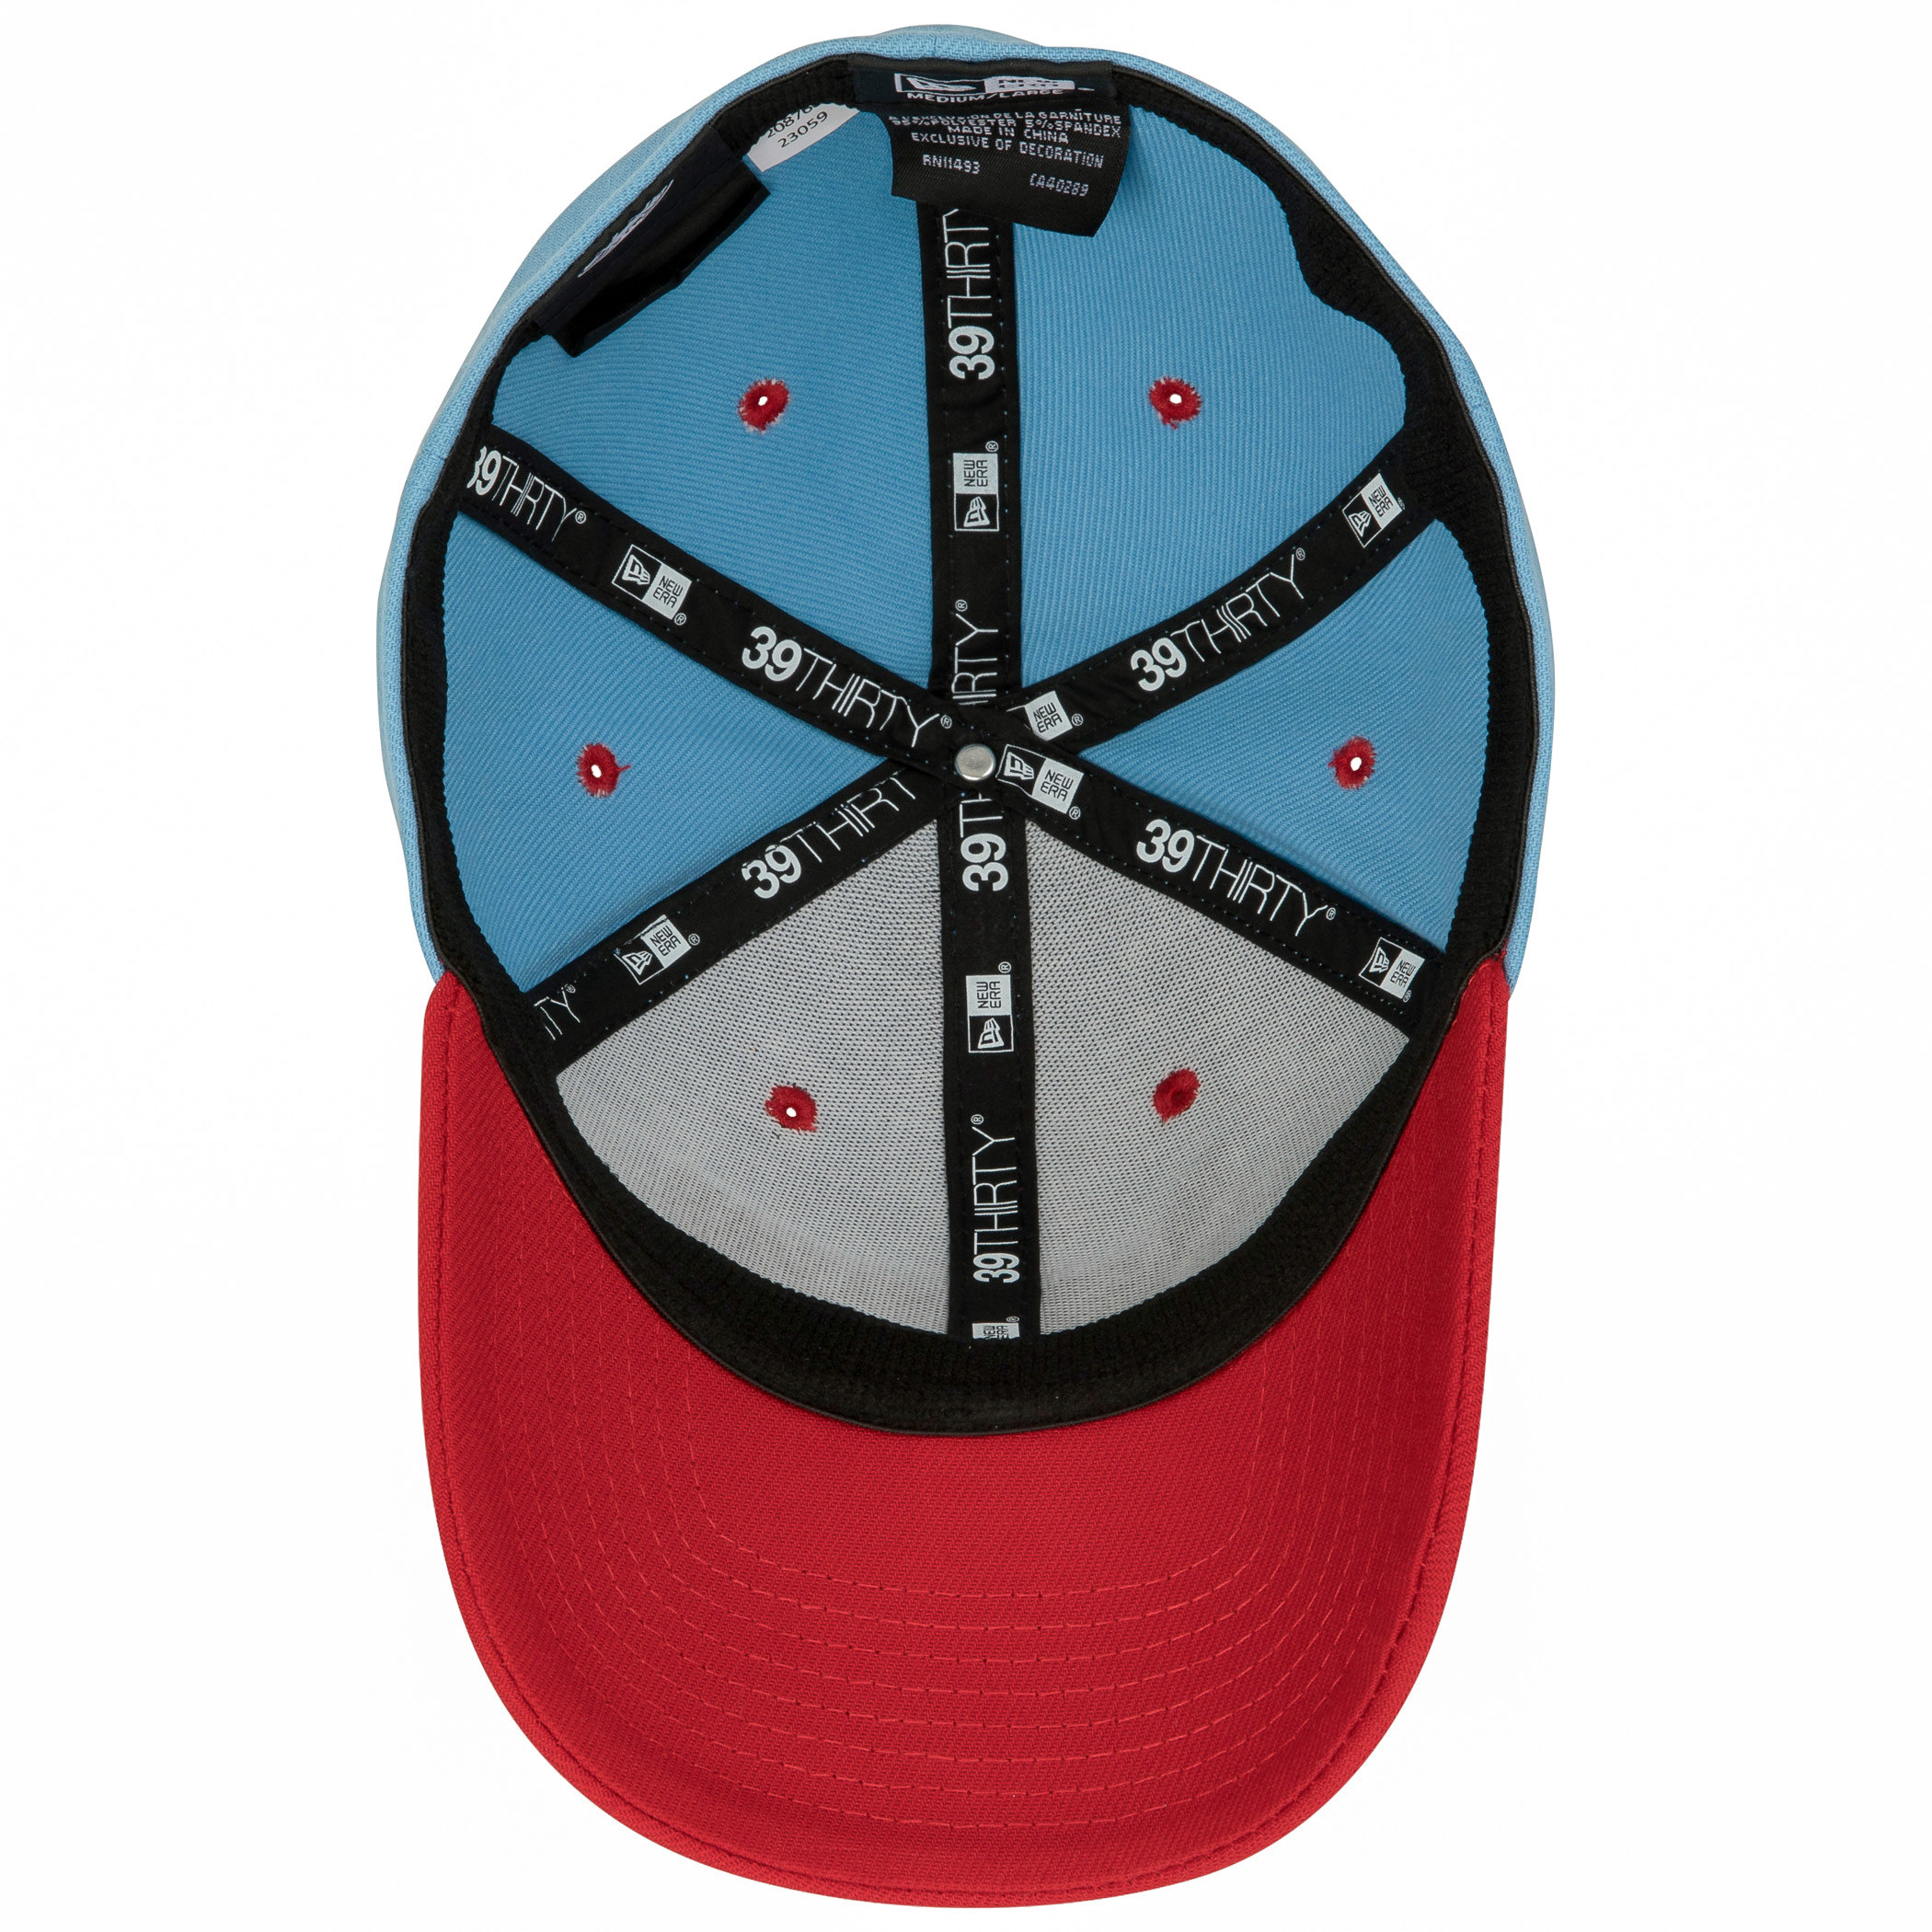 Adventure Time Logo New Era 39Thirty Fitted Hat